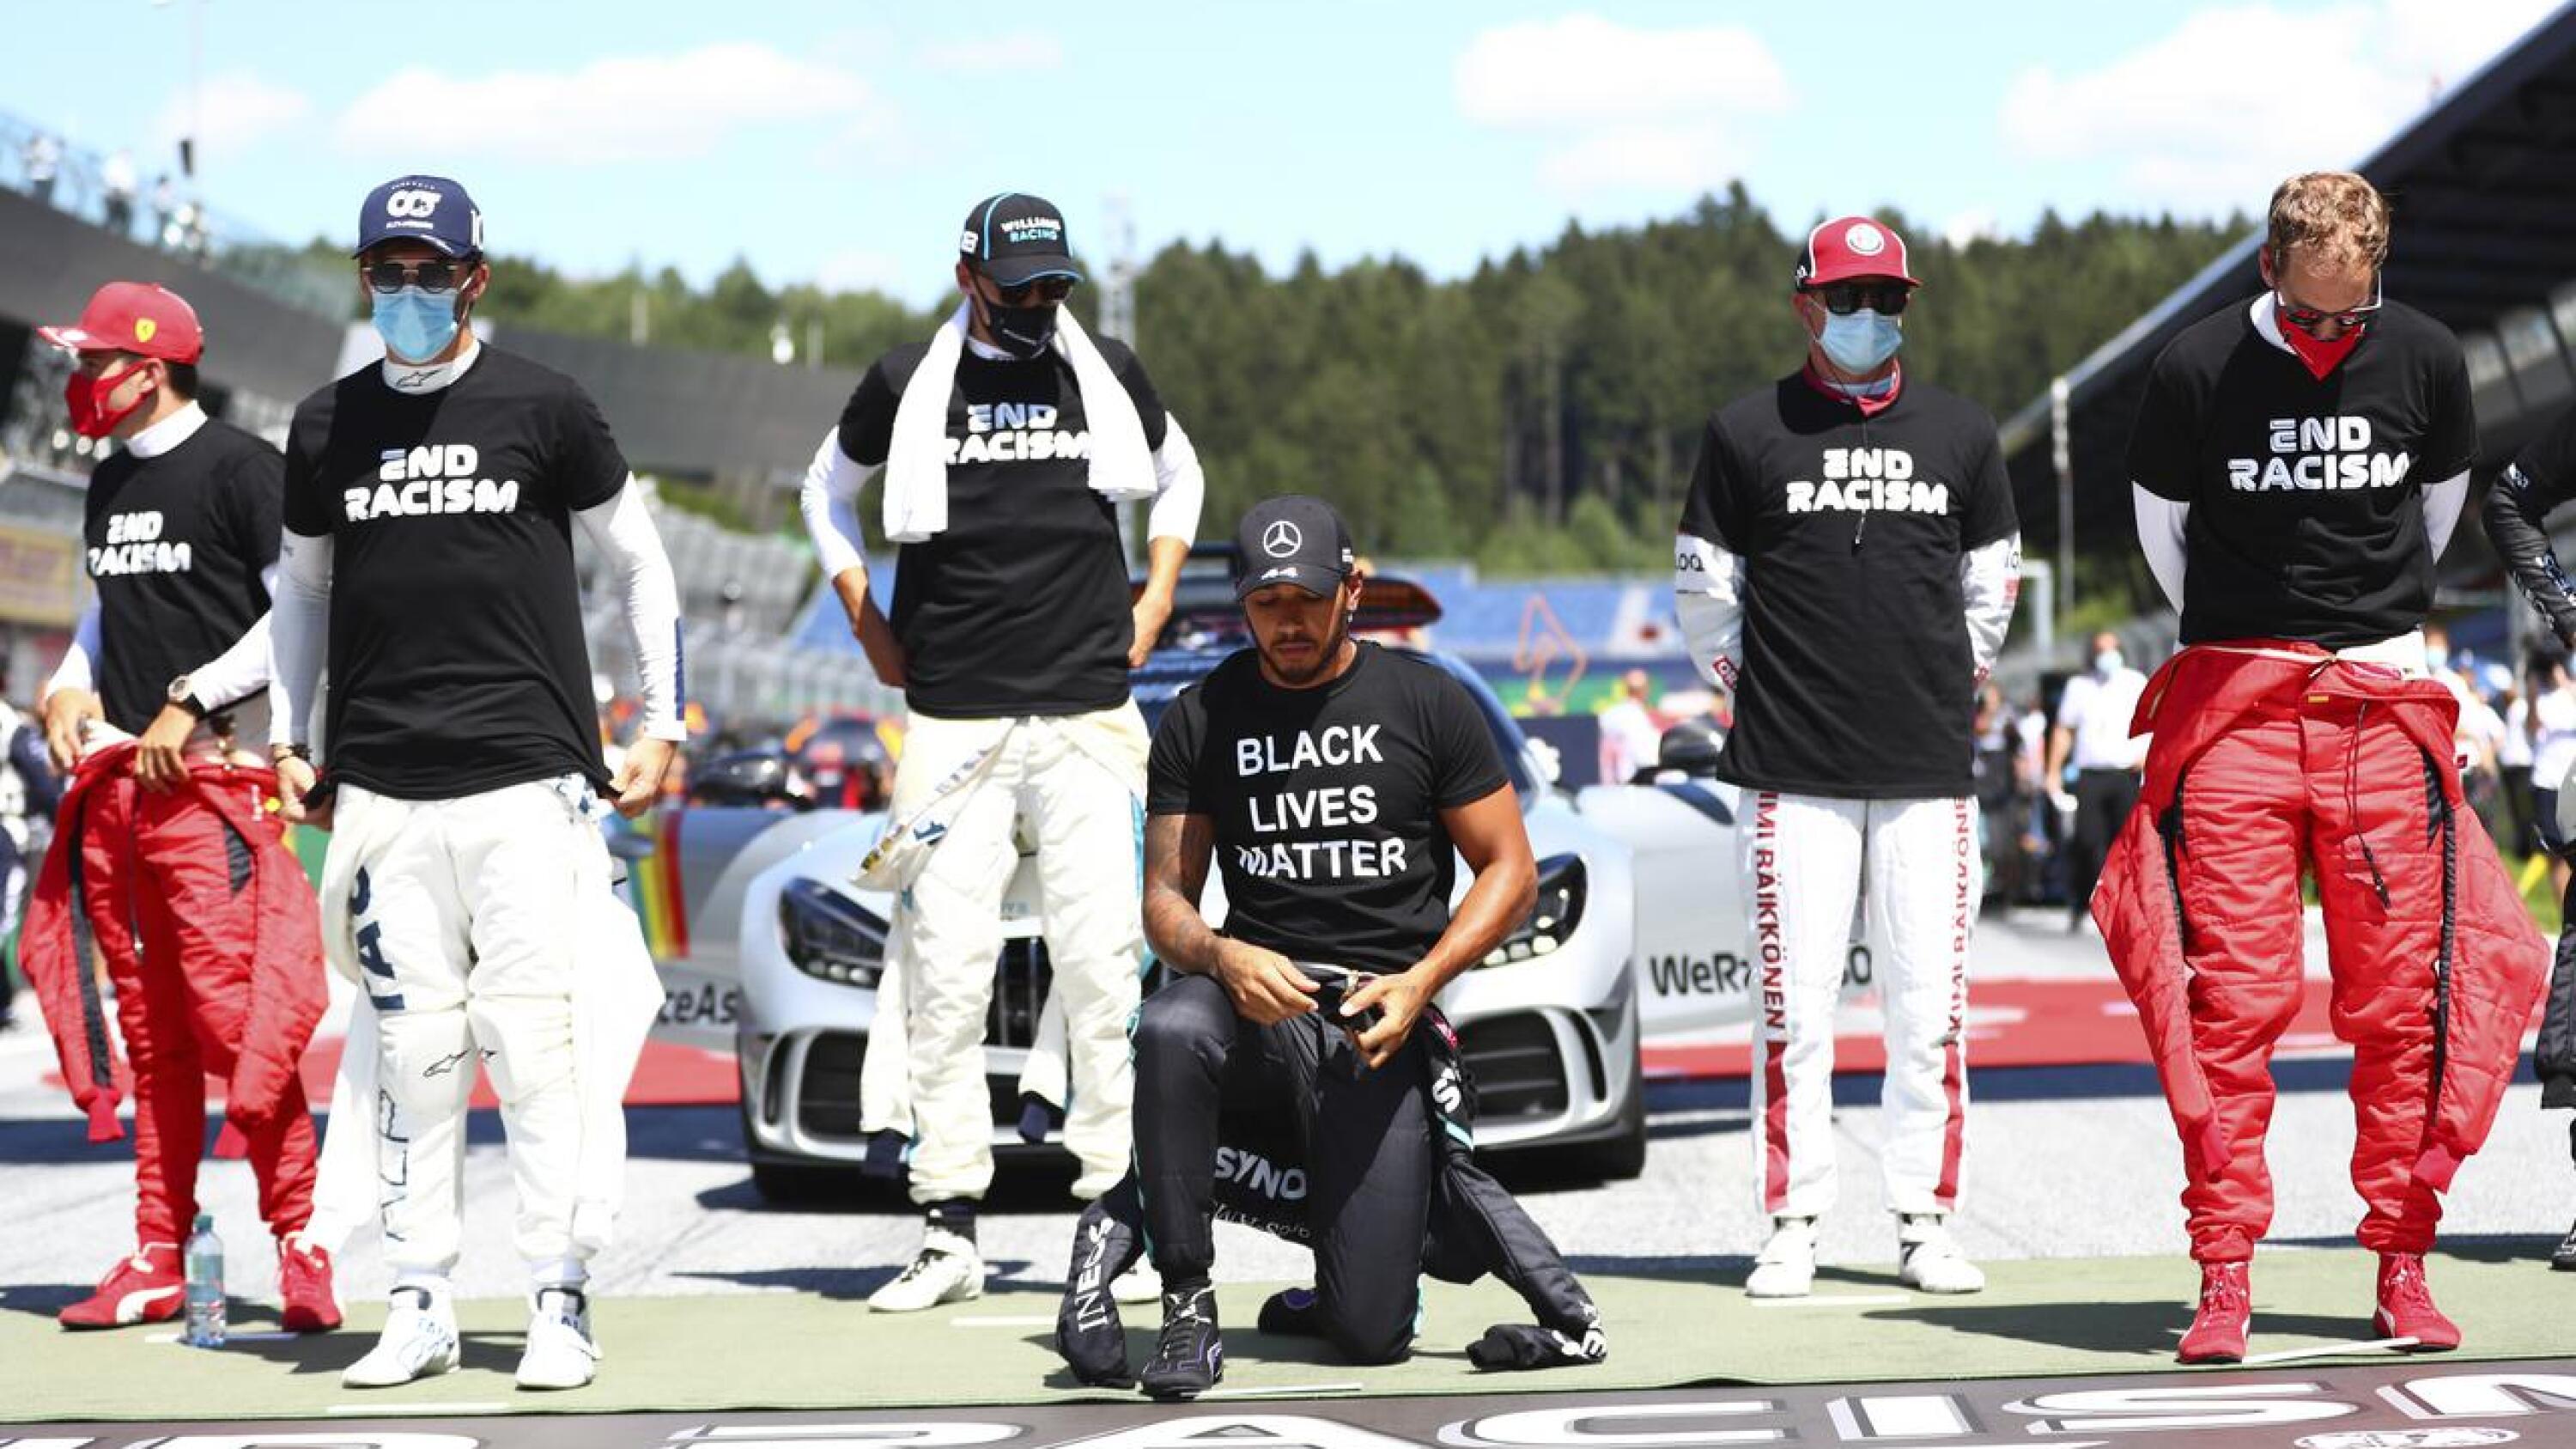 Lewis Hamilton took a knee in support of the Black Lives Matter movement, before the Austrian Grand Prix